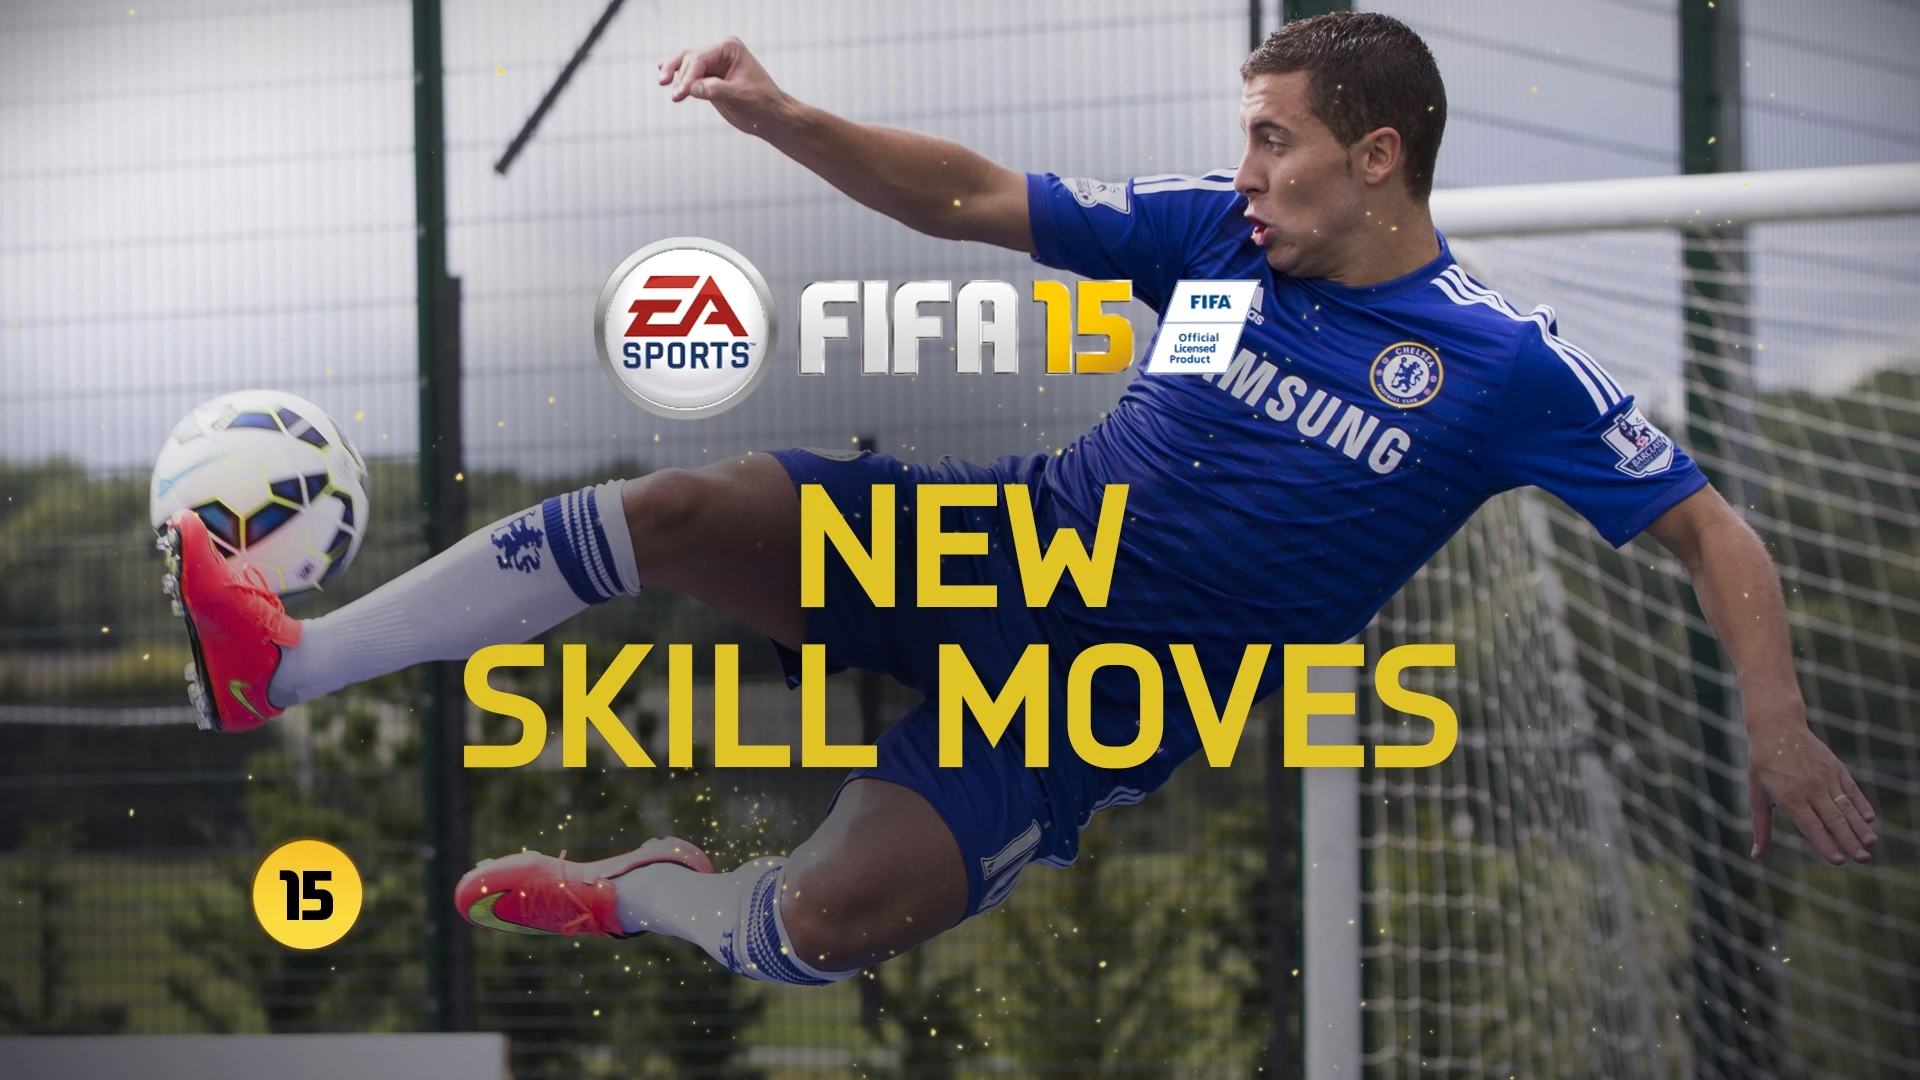 See new skill and flair moves from FIFA 15. Captured from FIFA 15 gameplay and with exclusive footage of Chelsea and Belgium star Eden Hazard - FIFA 15 cover star in the UK and France.